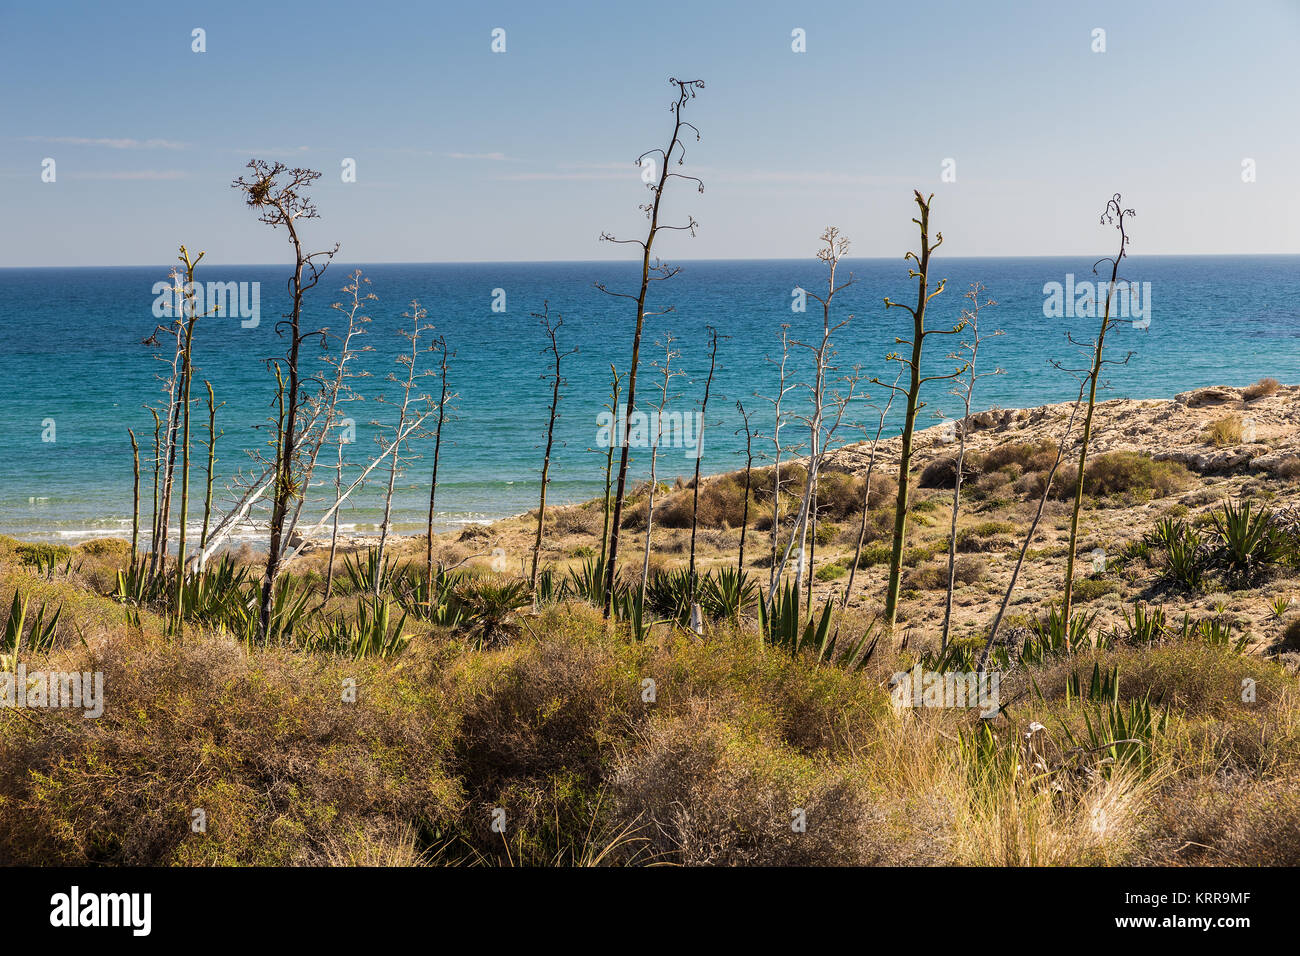 Los Genoveses beach. San Jose. Natural Park of Cabo de Gata. Spain. Foreground plants are Pitas. Typical of esta area. Stock Photo